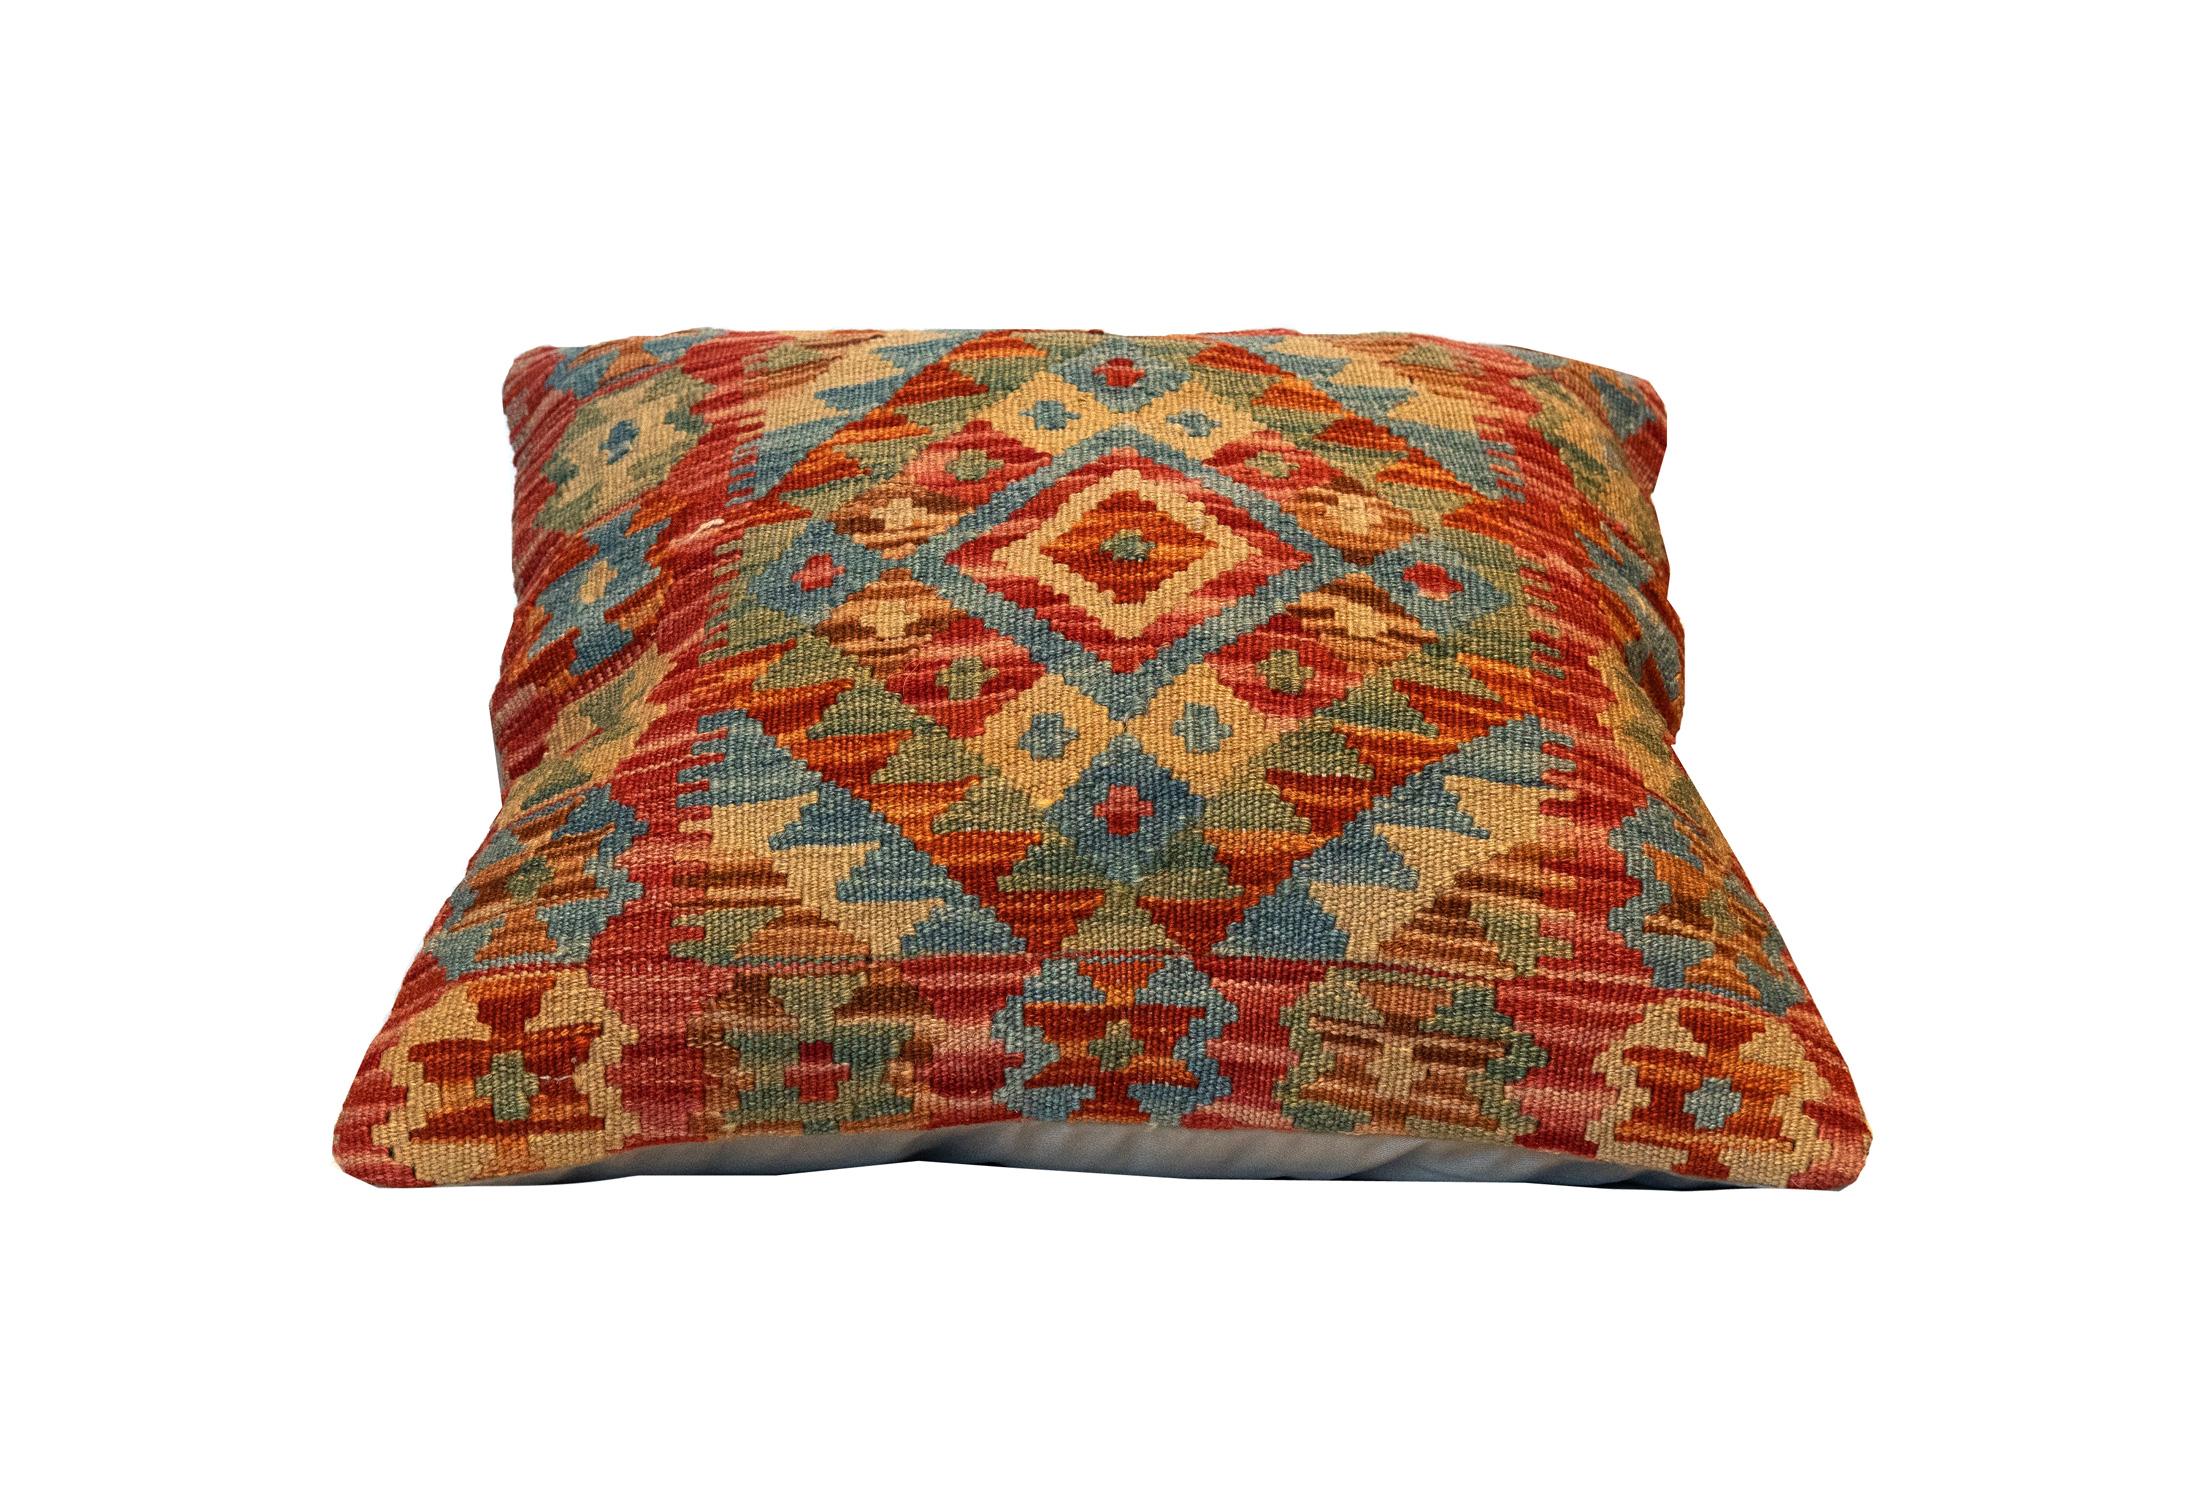 Late 20th Century Traditional Kilim Cushion Cover Handmade Wool Geometric Scatter Pillow